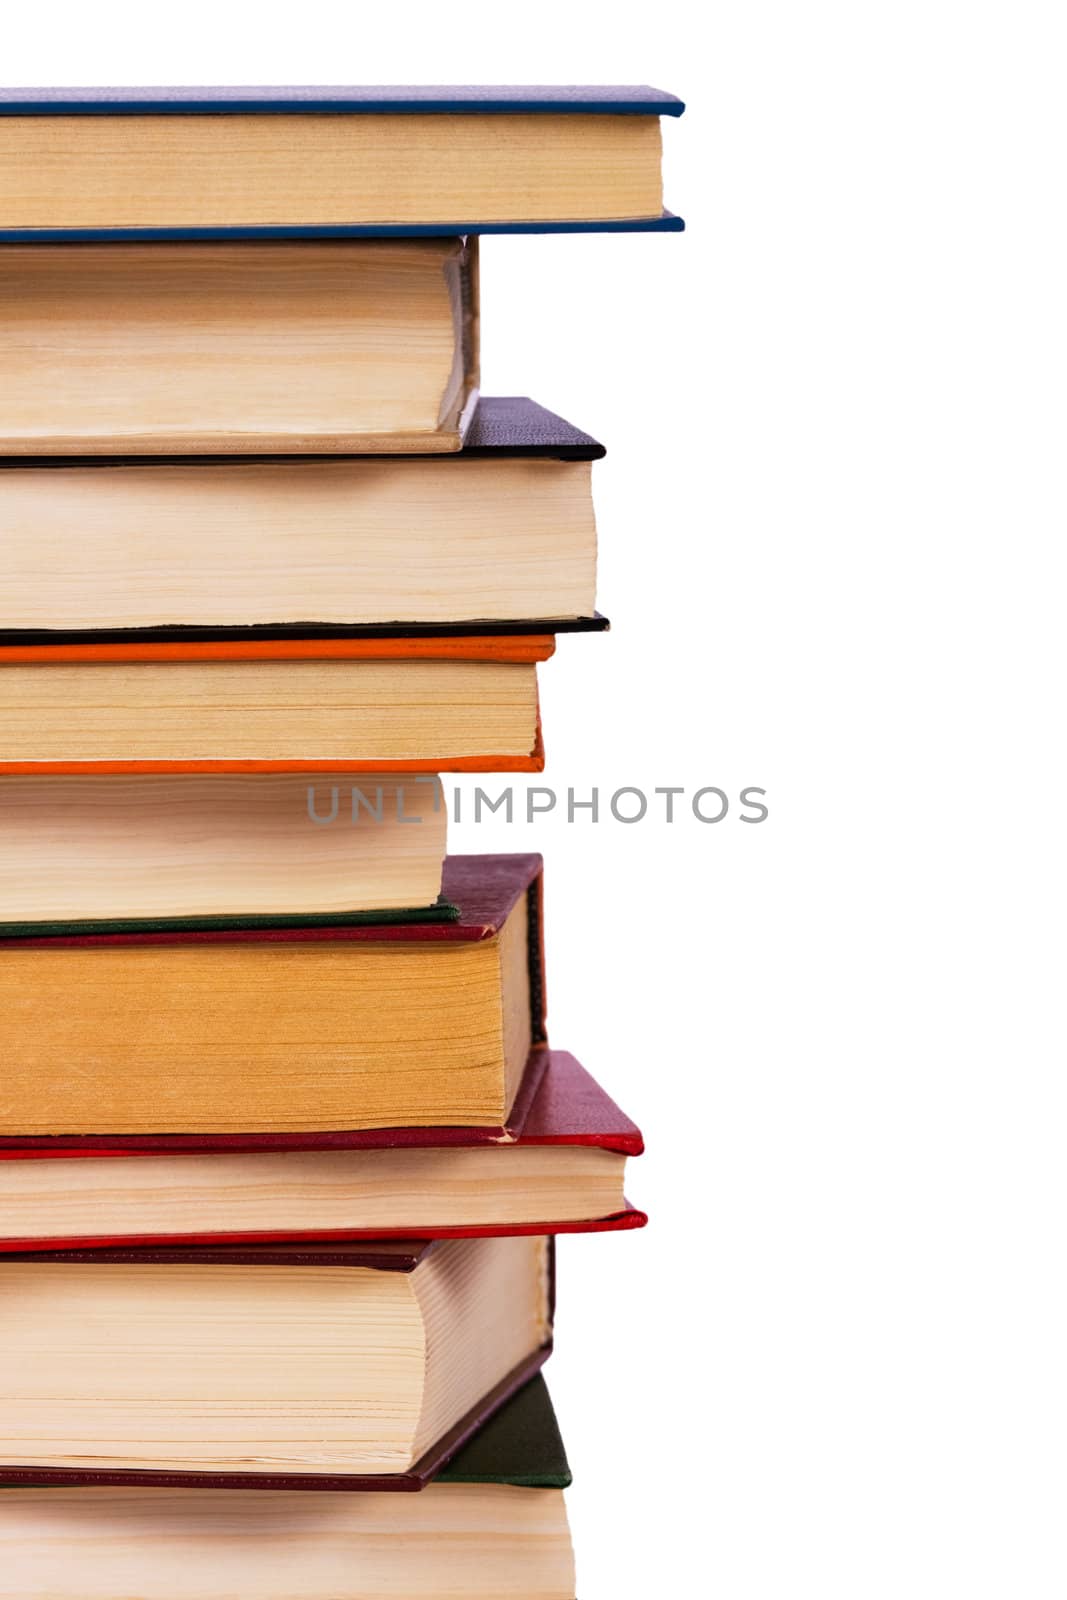 Pile of books isolated on a white background by grigorenko